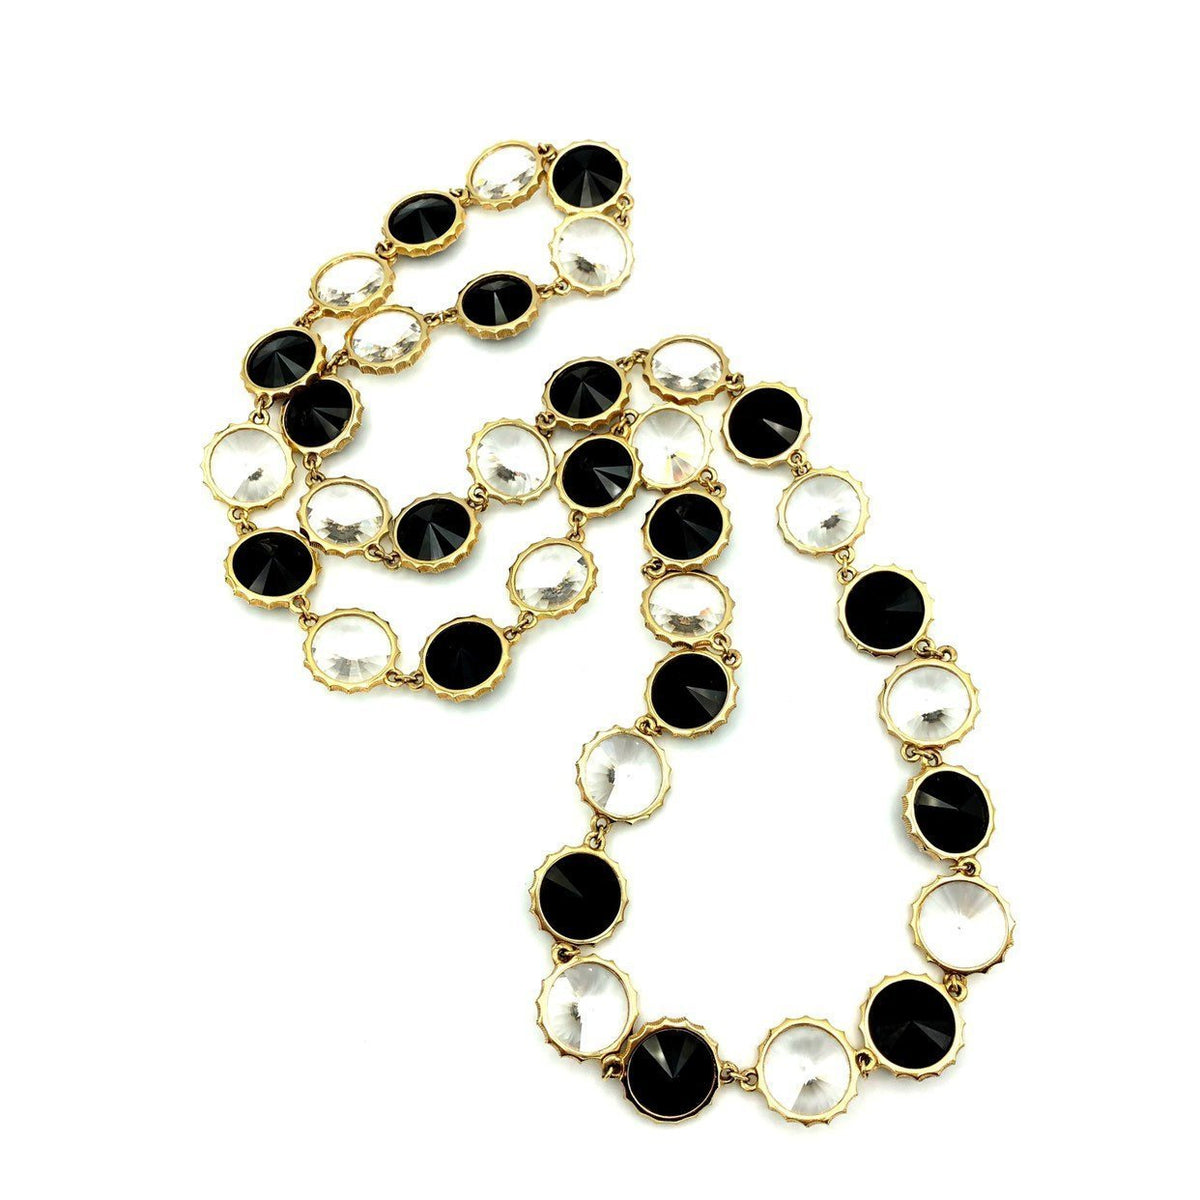 Vintage Black & White Chaton Faceted Rivoli Long Necklace - 24 Wishes Vintage Jewelry